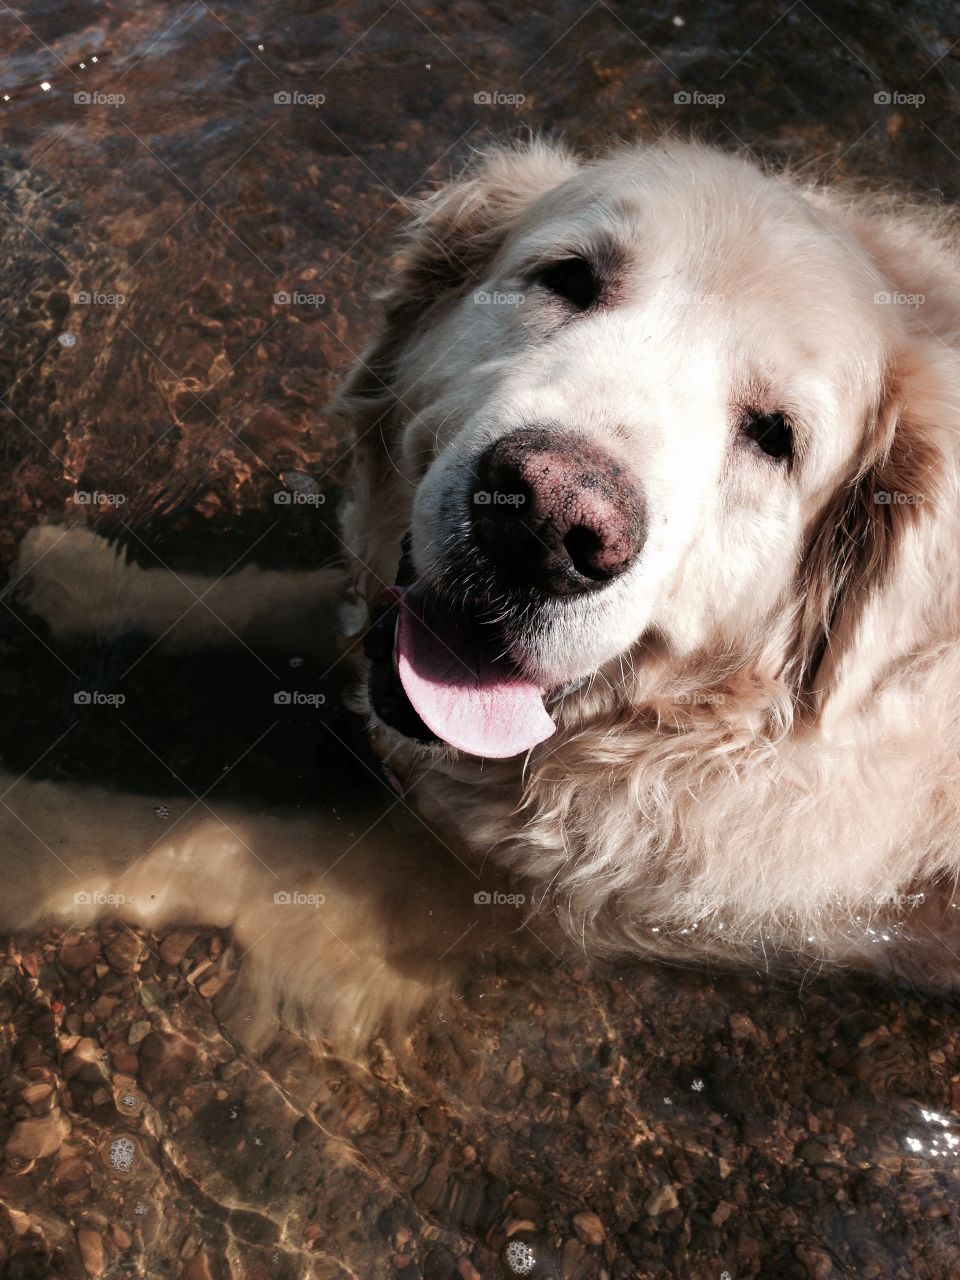 The water cools him after a long morning walk